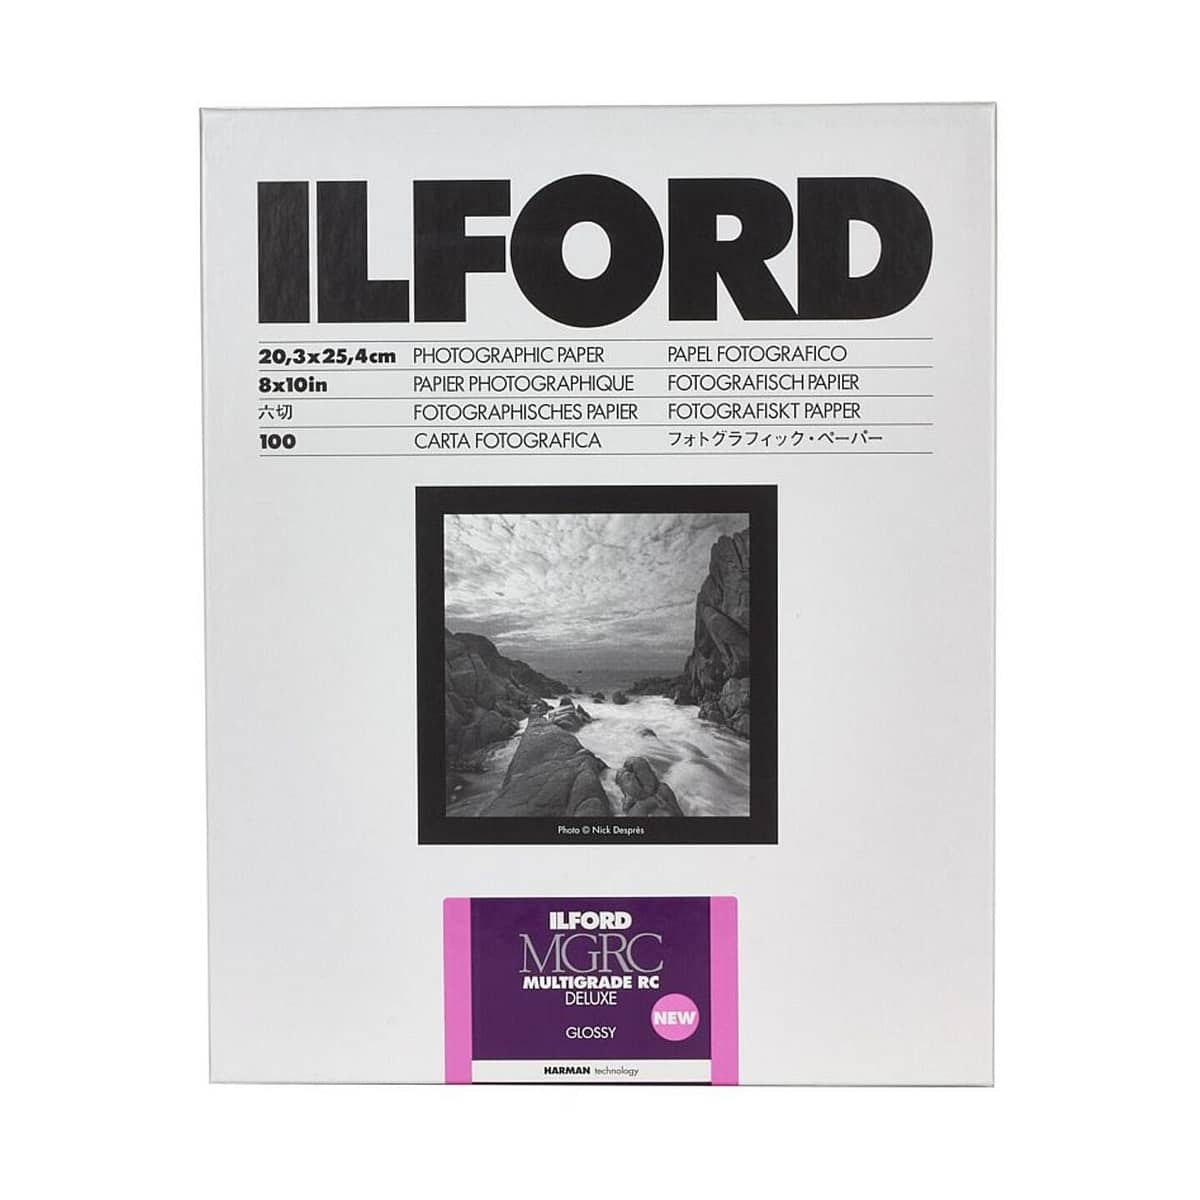 ilford_mg_rc_deluxe_glossy_01